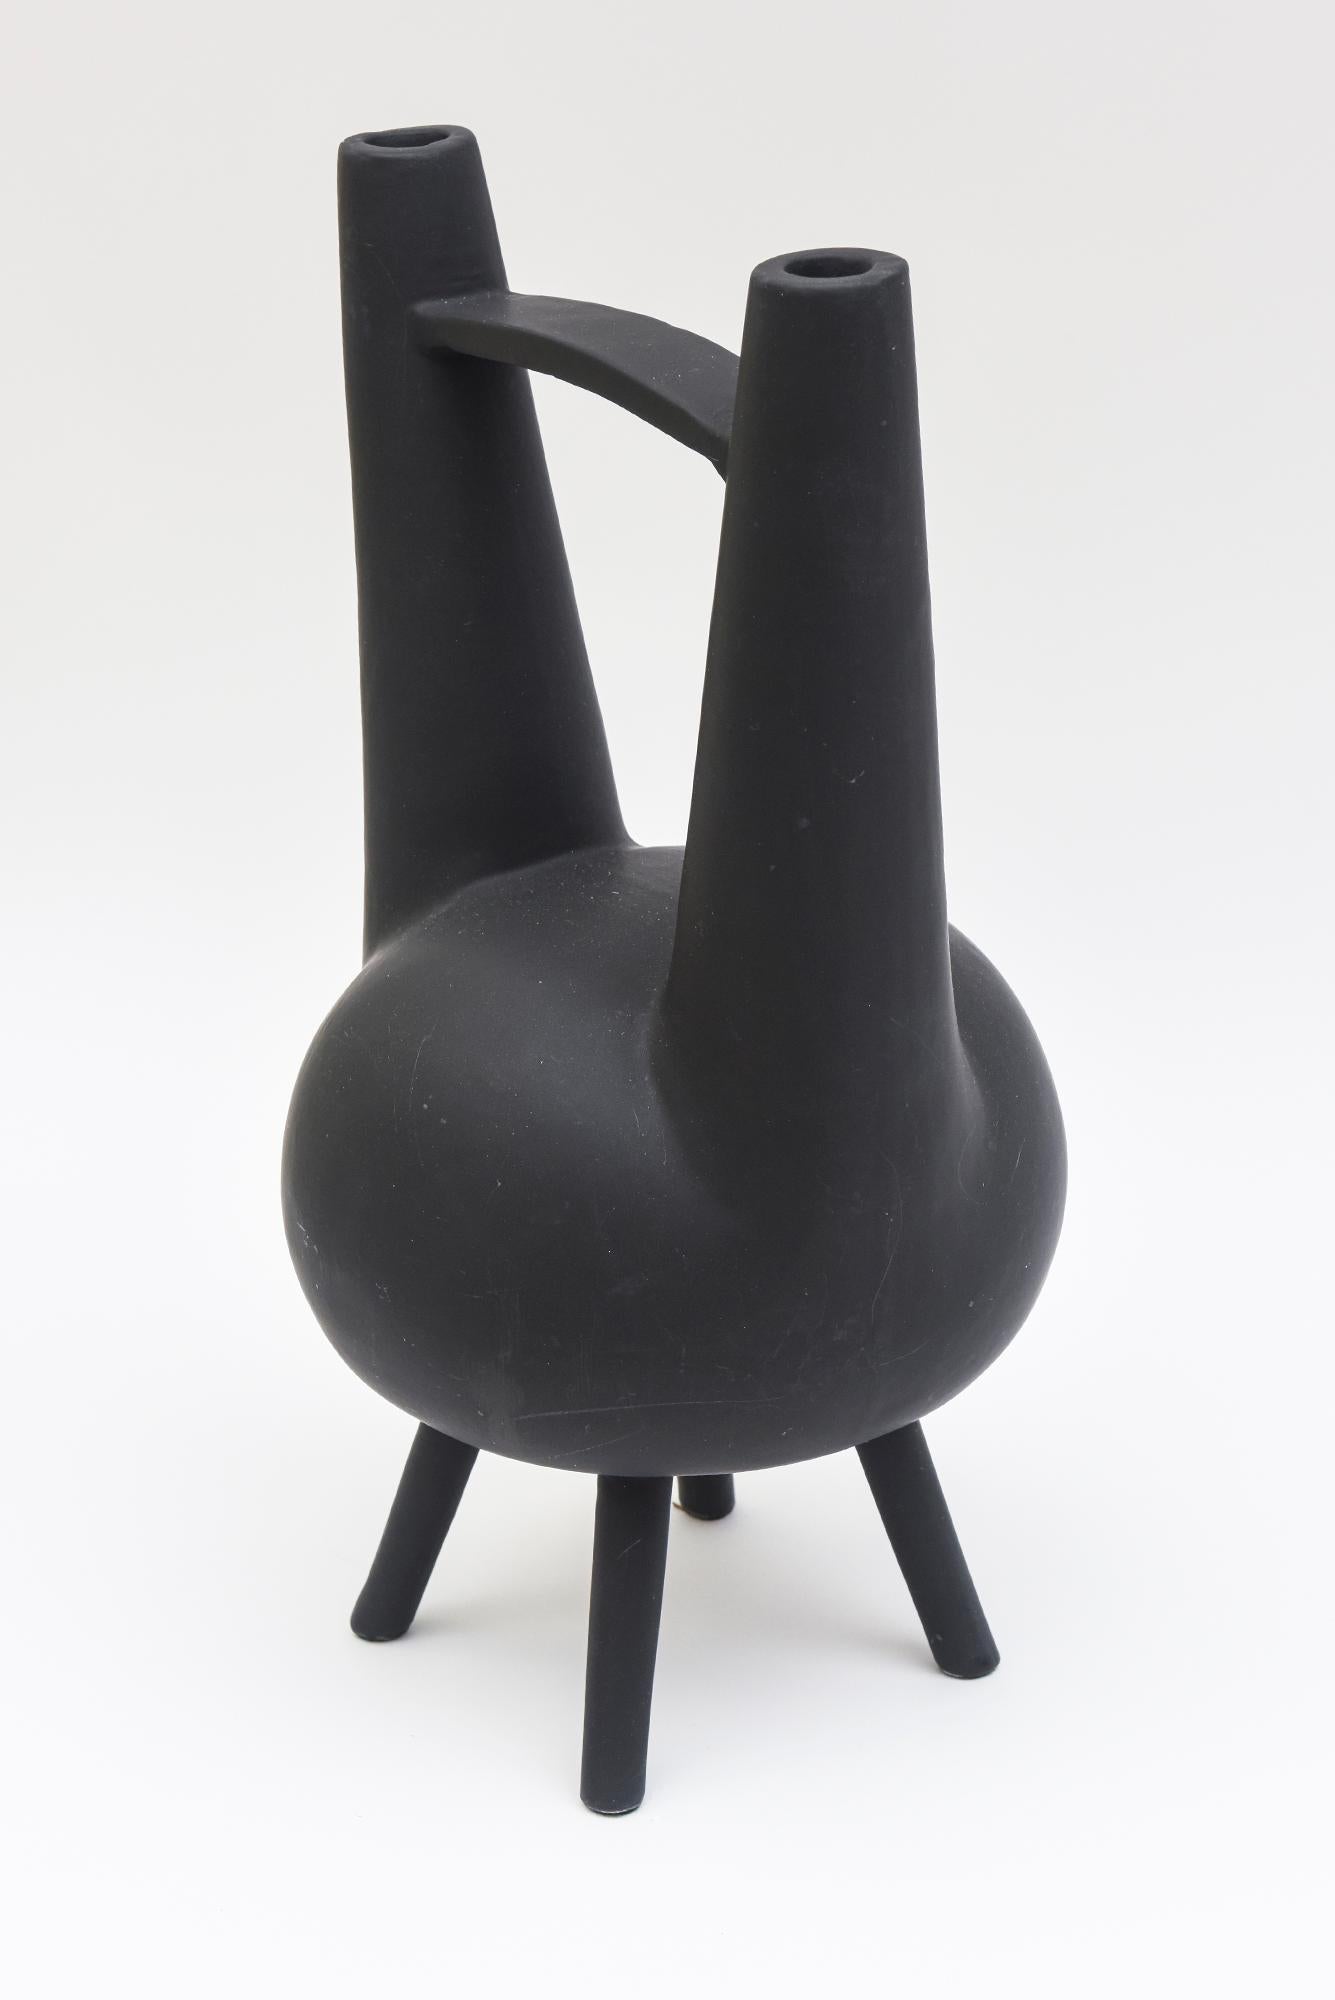 This most unusual Italian hallmarked Pampaloni matt glazed ceramic black abstract vessel or sculpture or object has 4 tripod legs with a bulbous center. It has allusions to a Japanese design meets Italian form. It has been attributed to a design